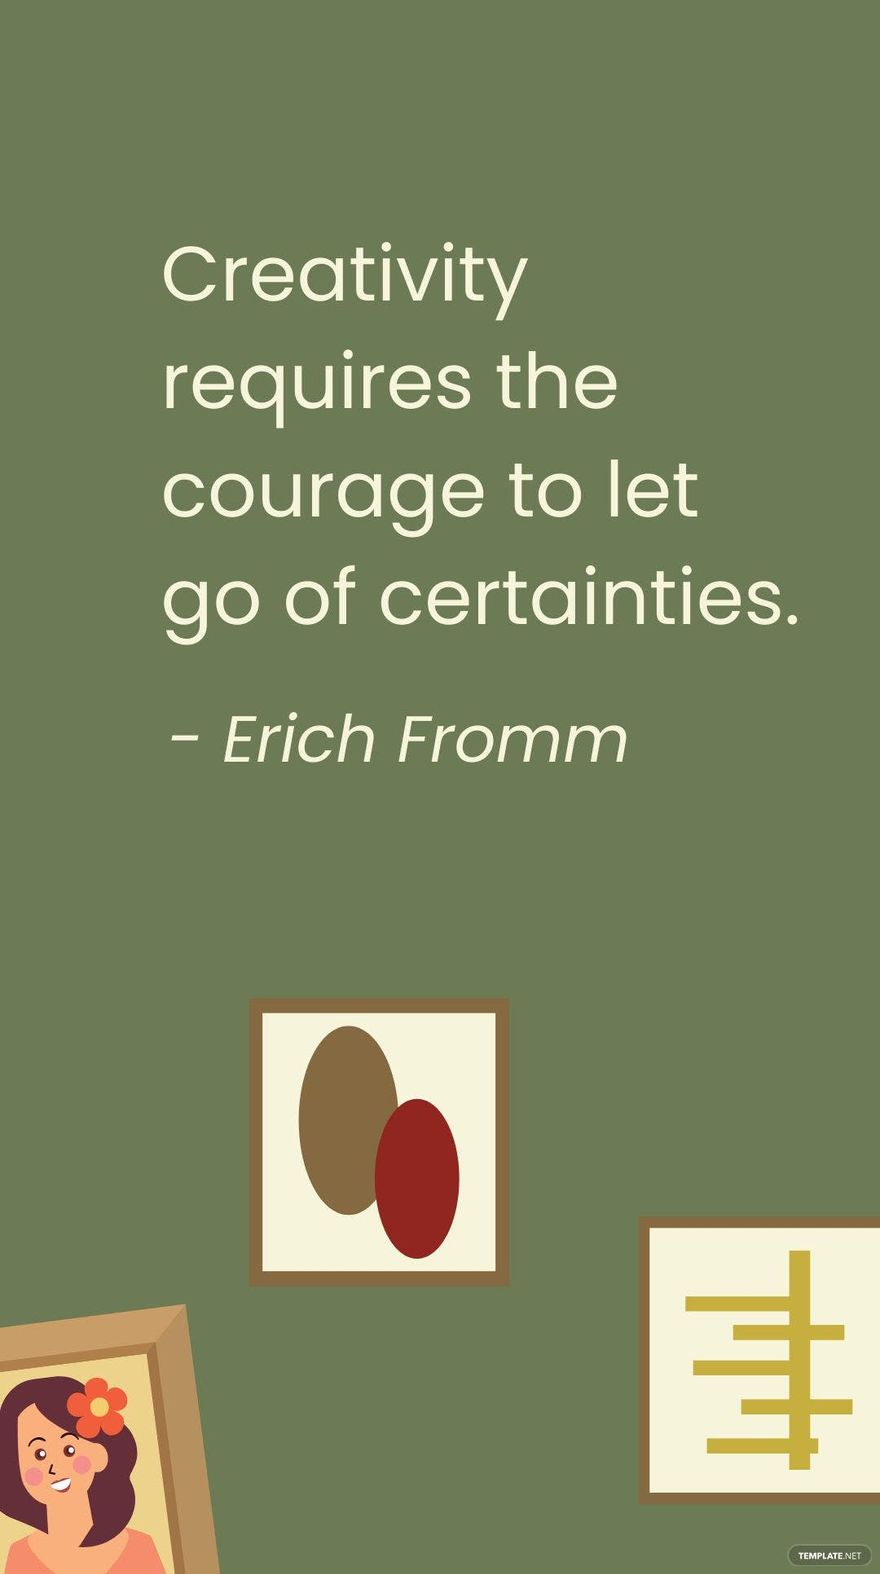 Erich Fromm - Creativity requires the courage to let go of certainties.